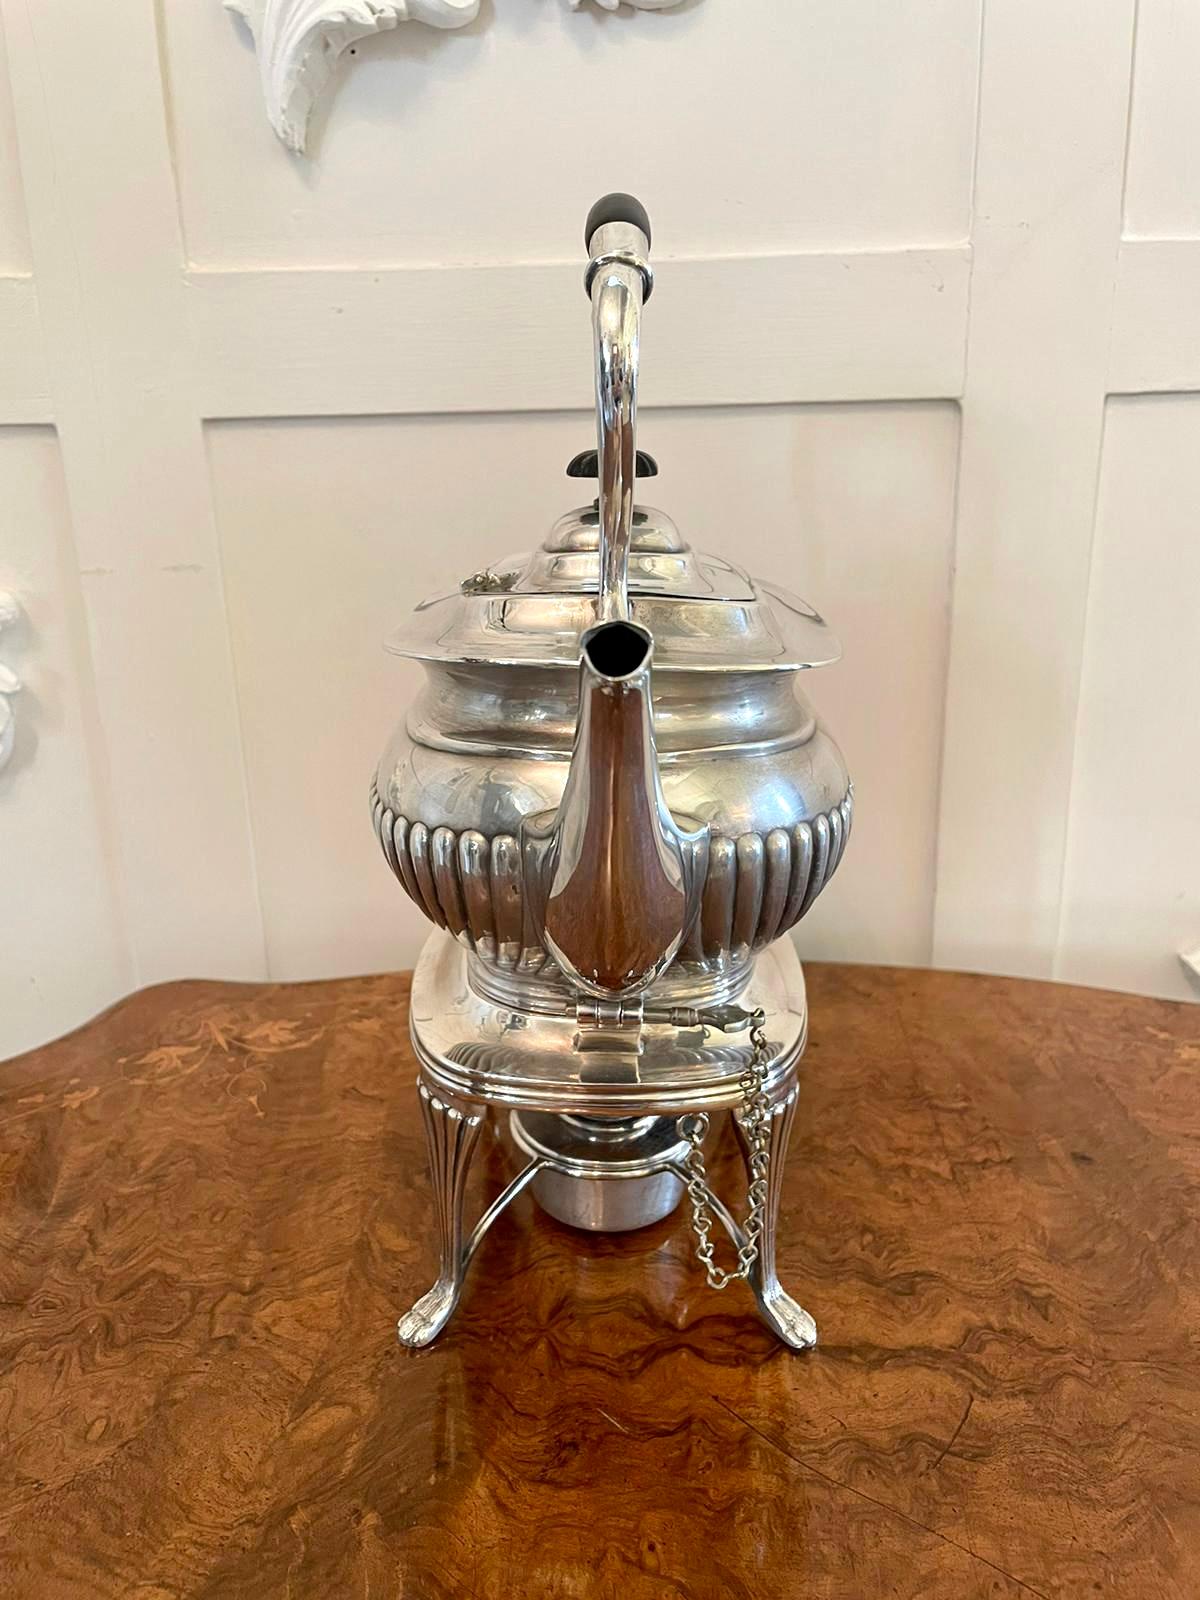 Antique Edwardian silver plated spirit kettle on stand with original shaped handle, lift up lid with original handle shaped spout. Pretty reeded decoration with original burner and raised on reeded shaped paw feet.

A wonderful decorative example